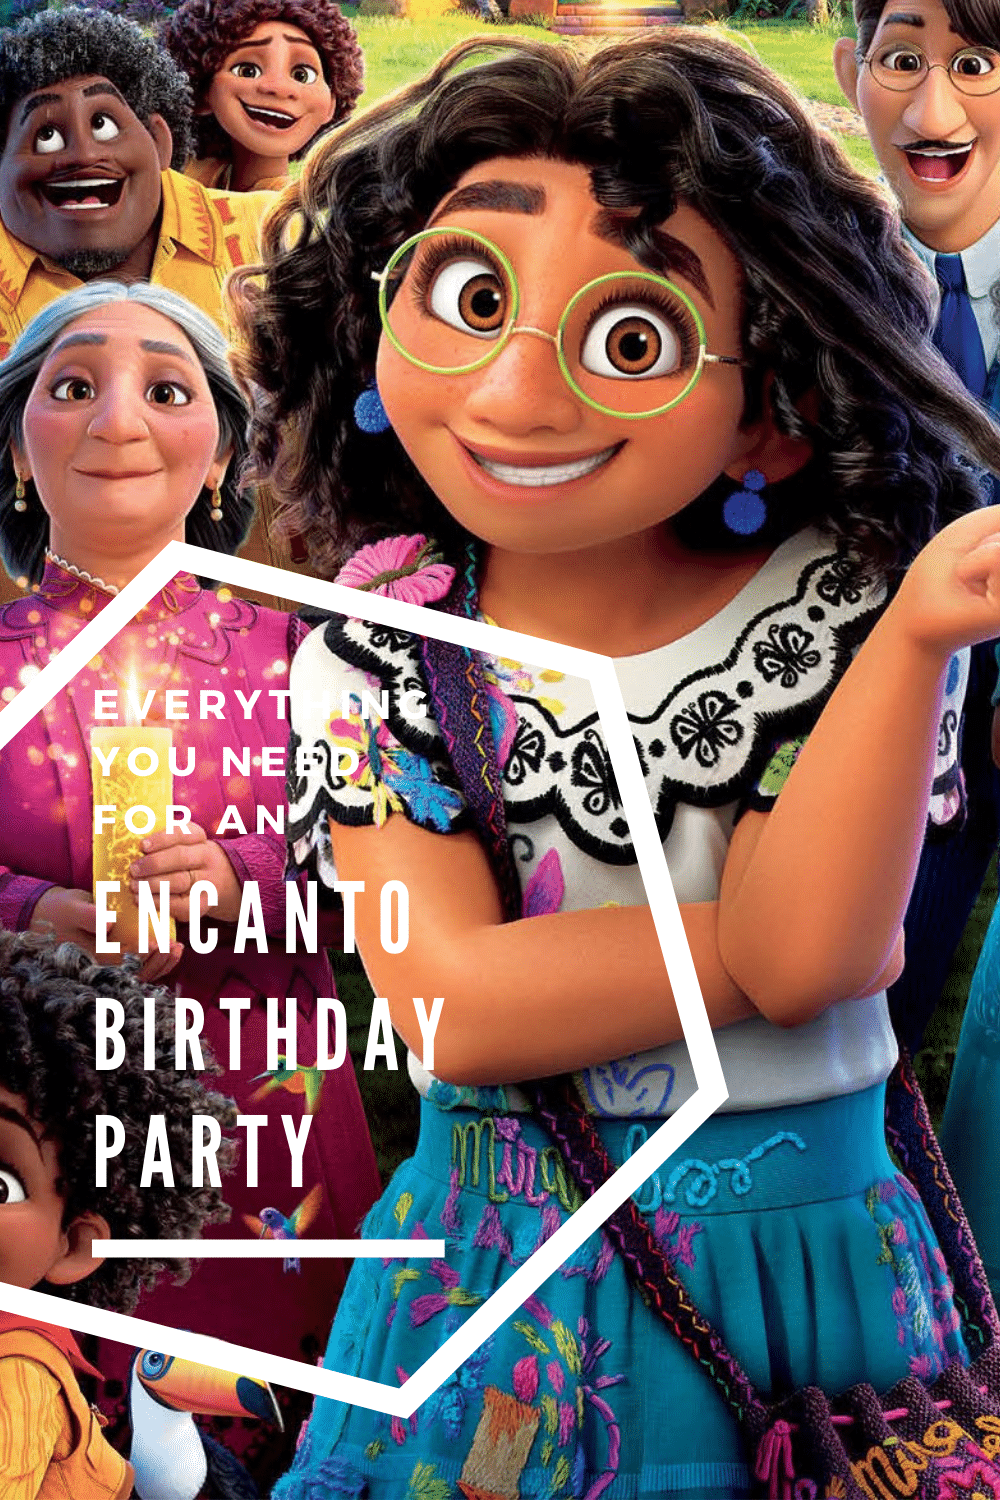 Buy Everything You Need For An Encanto Birthday Party with Amazon Prime